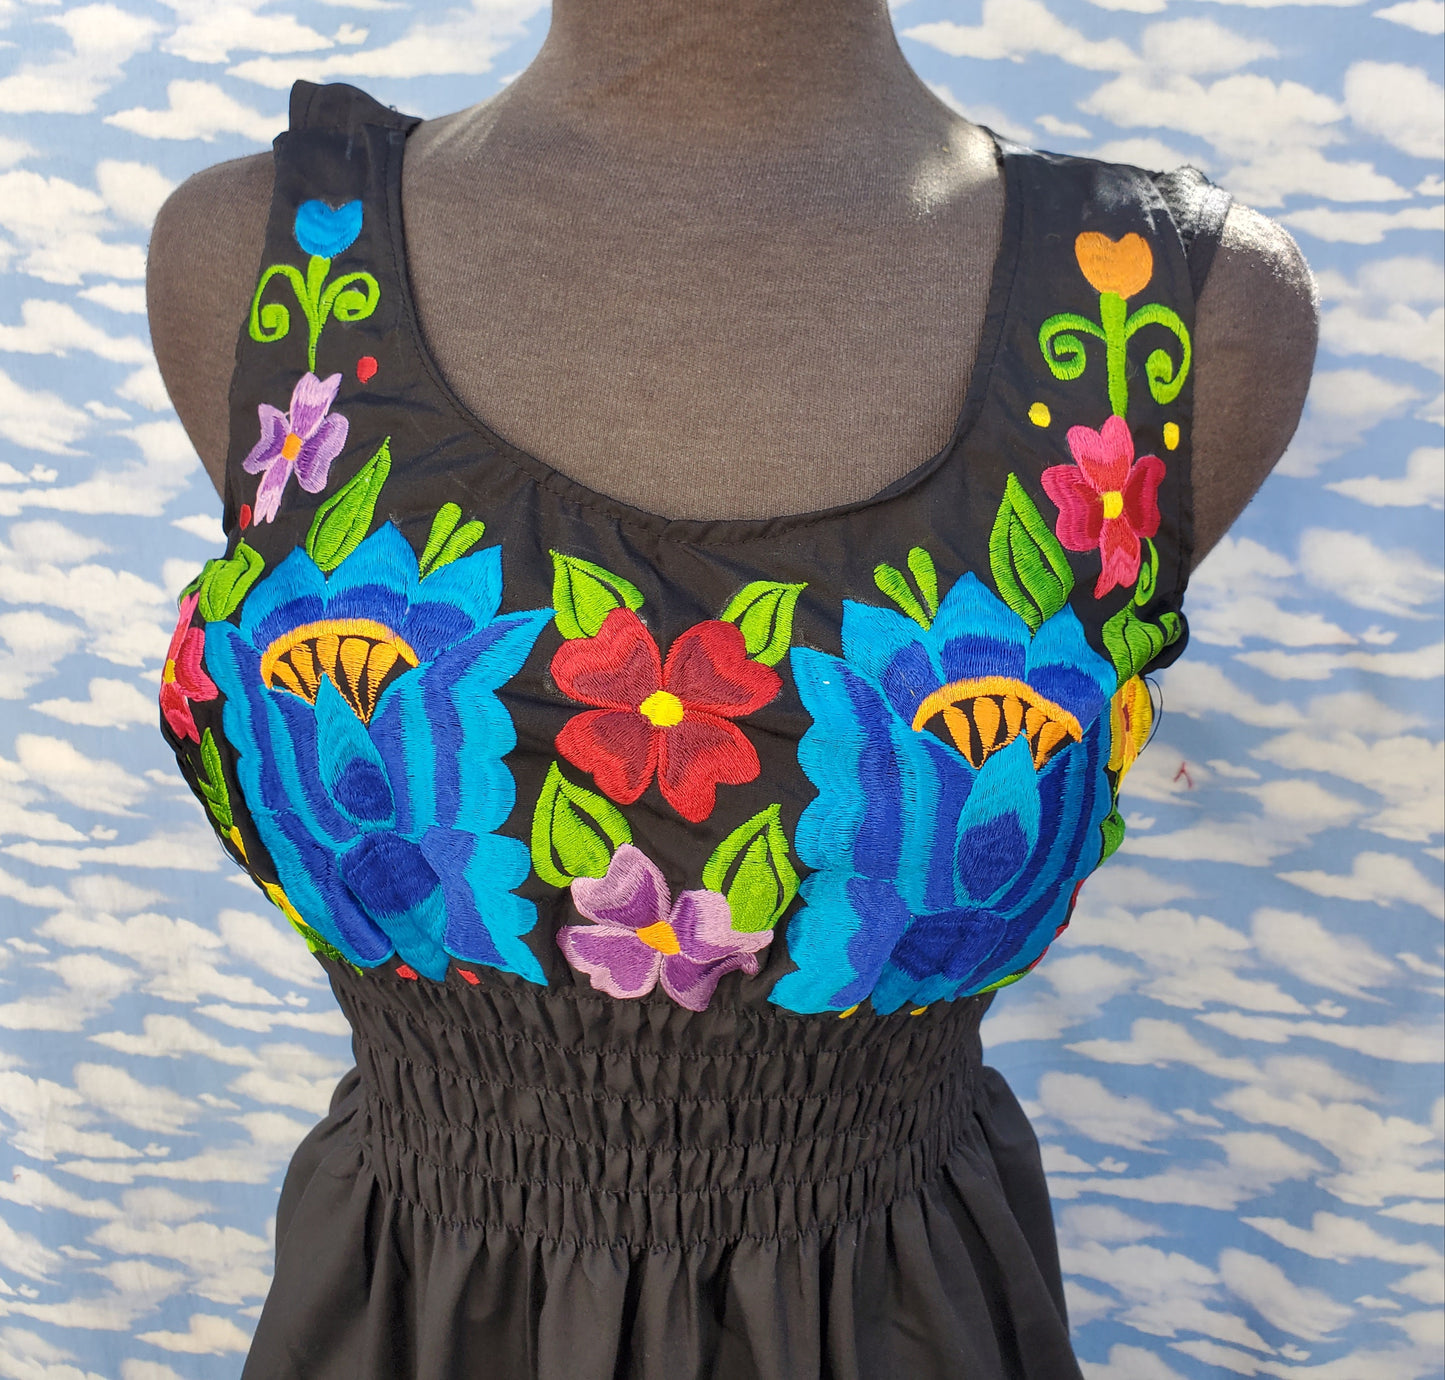 1x hand embroided dress (fits s-1x)